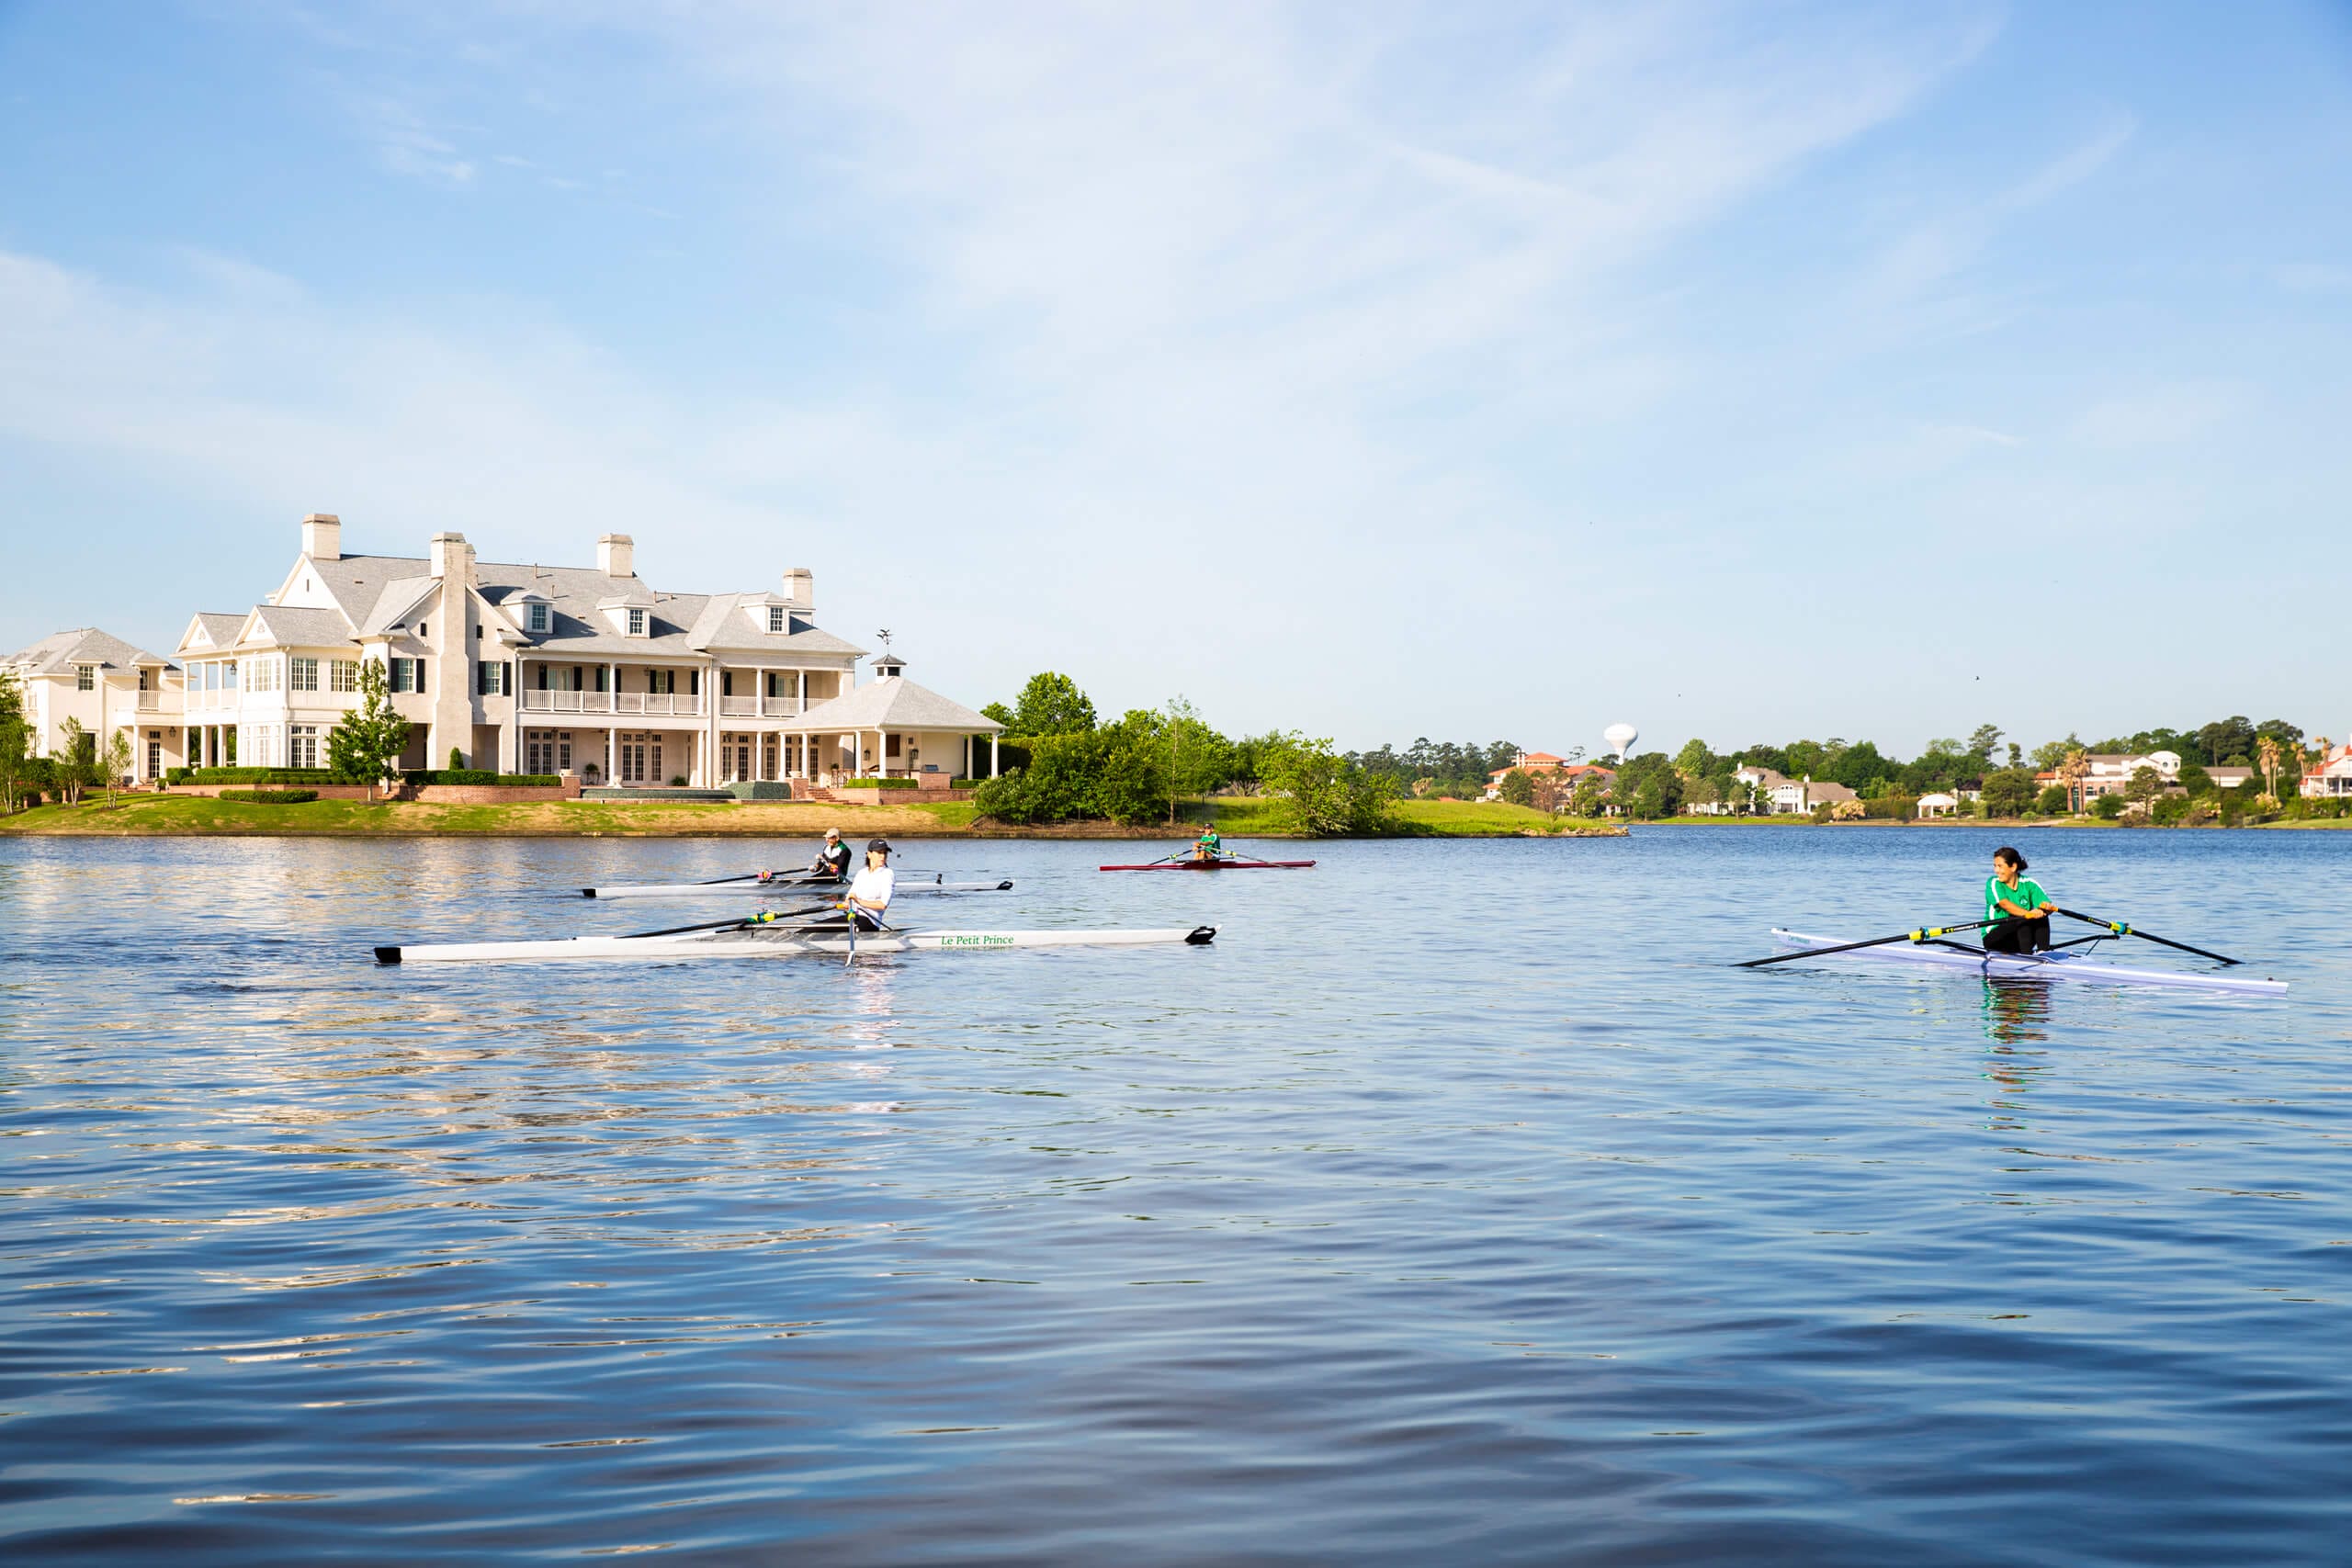 Four rowers meet on the lake in The Woodlands.